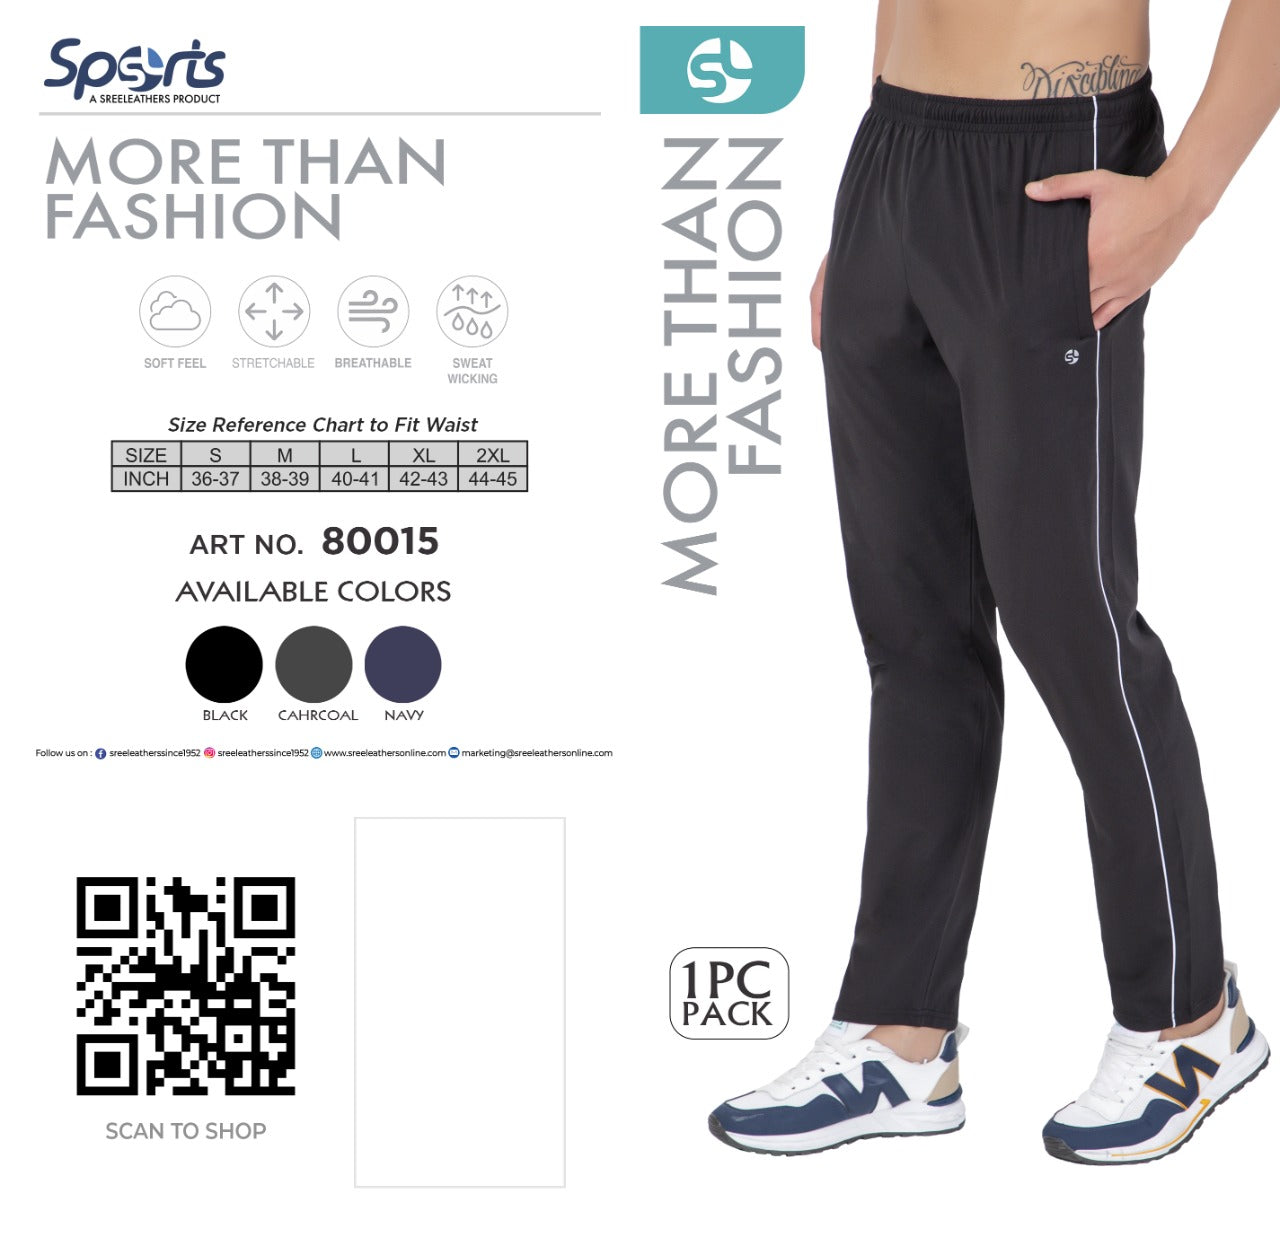 Discover more than 62 rr night pants online best - in.eteachers